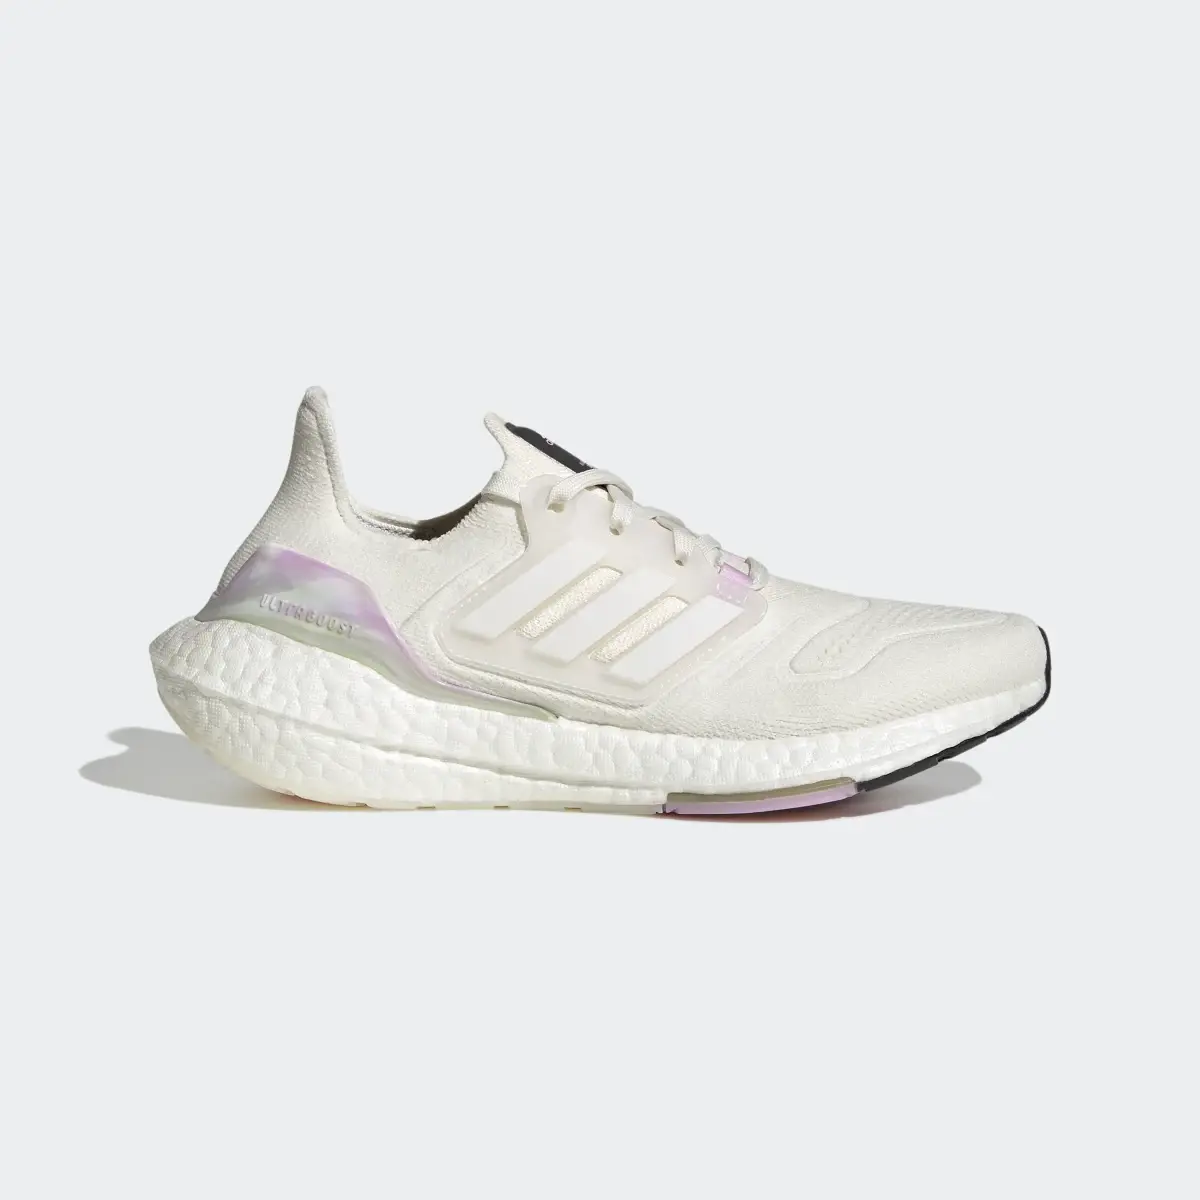 Adidas Ultraboost 22 Made With Nature Shoes. 2